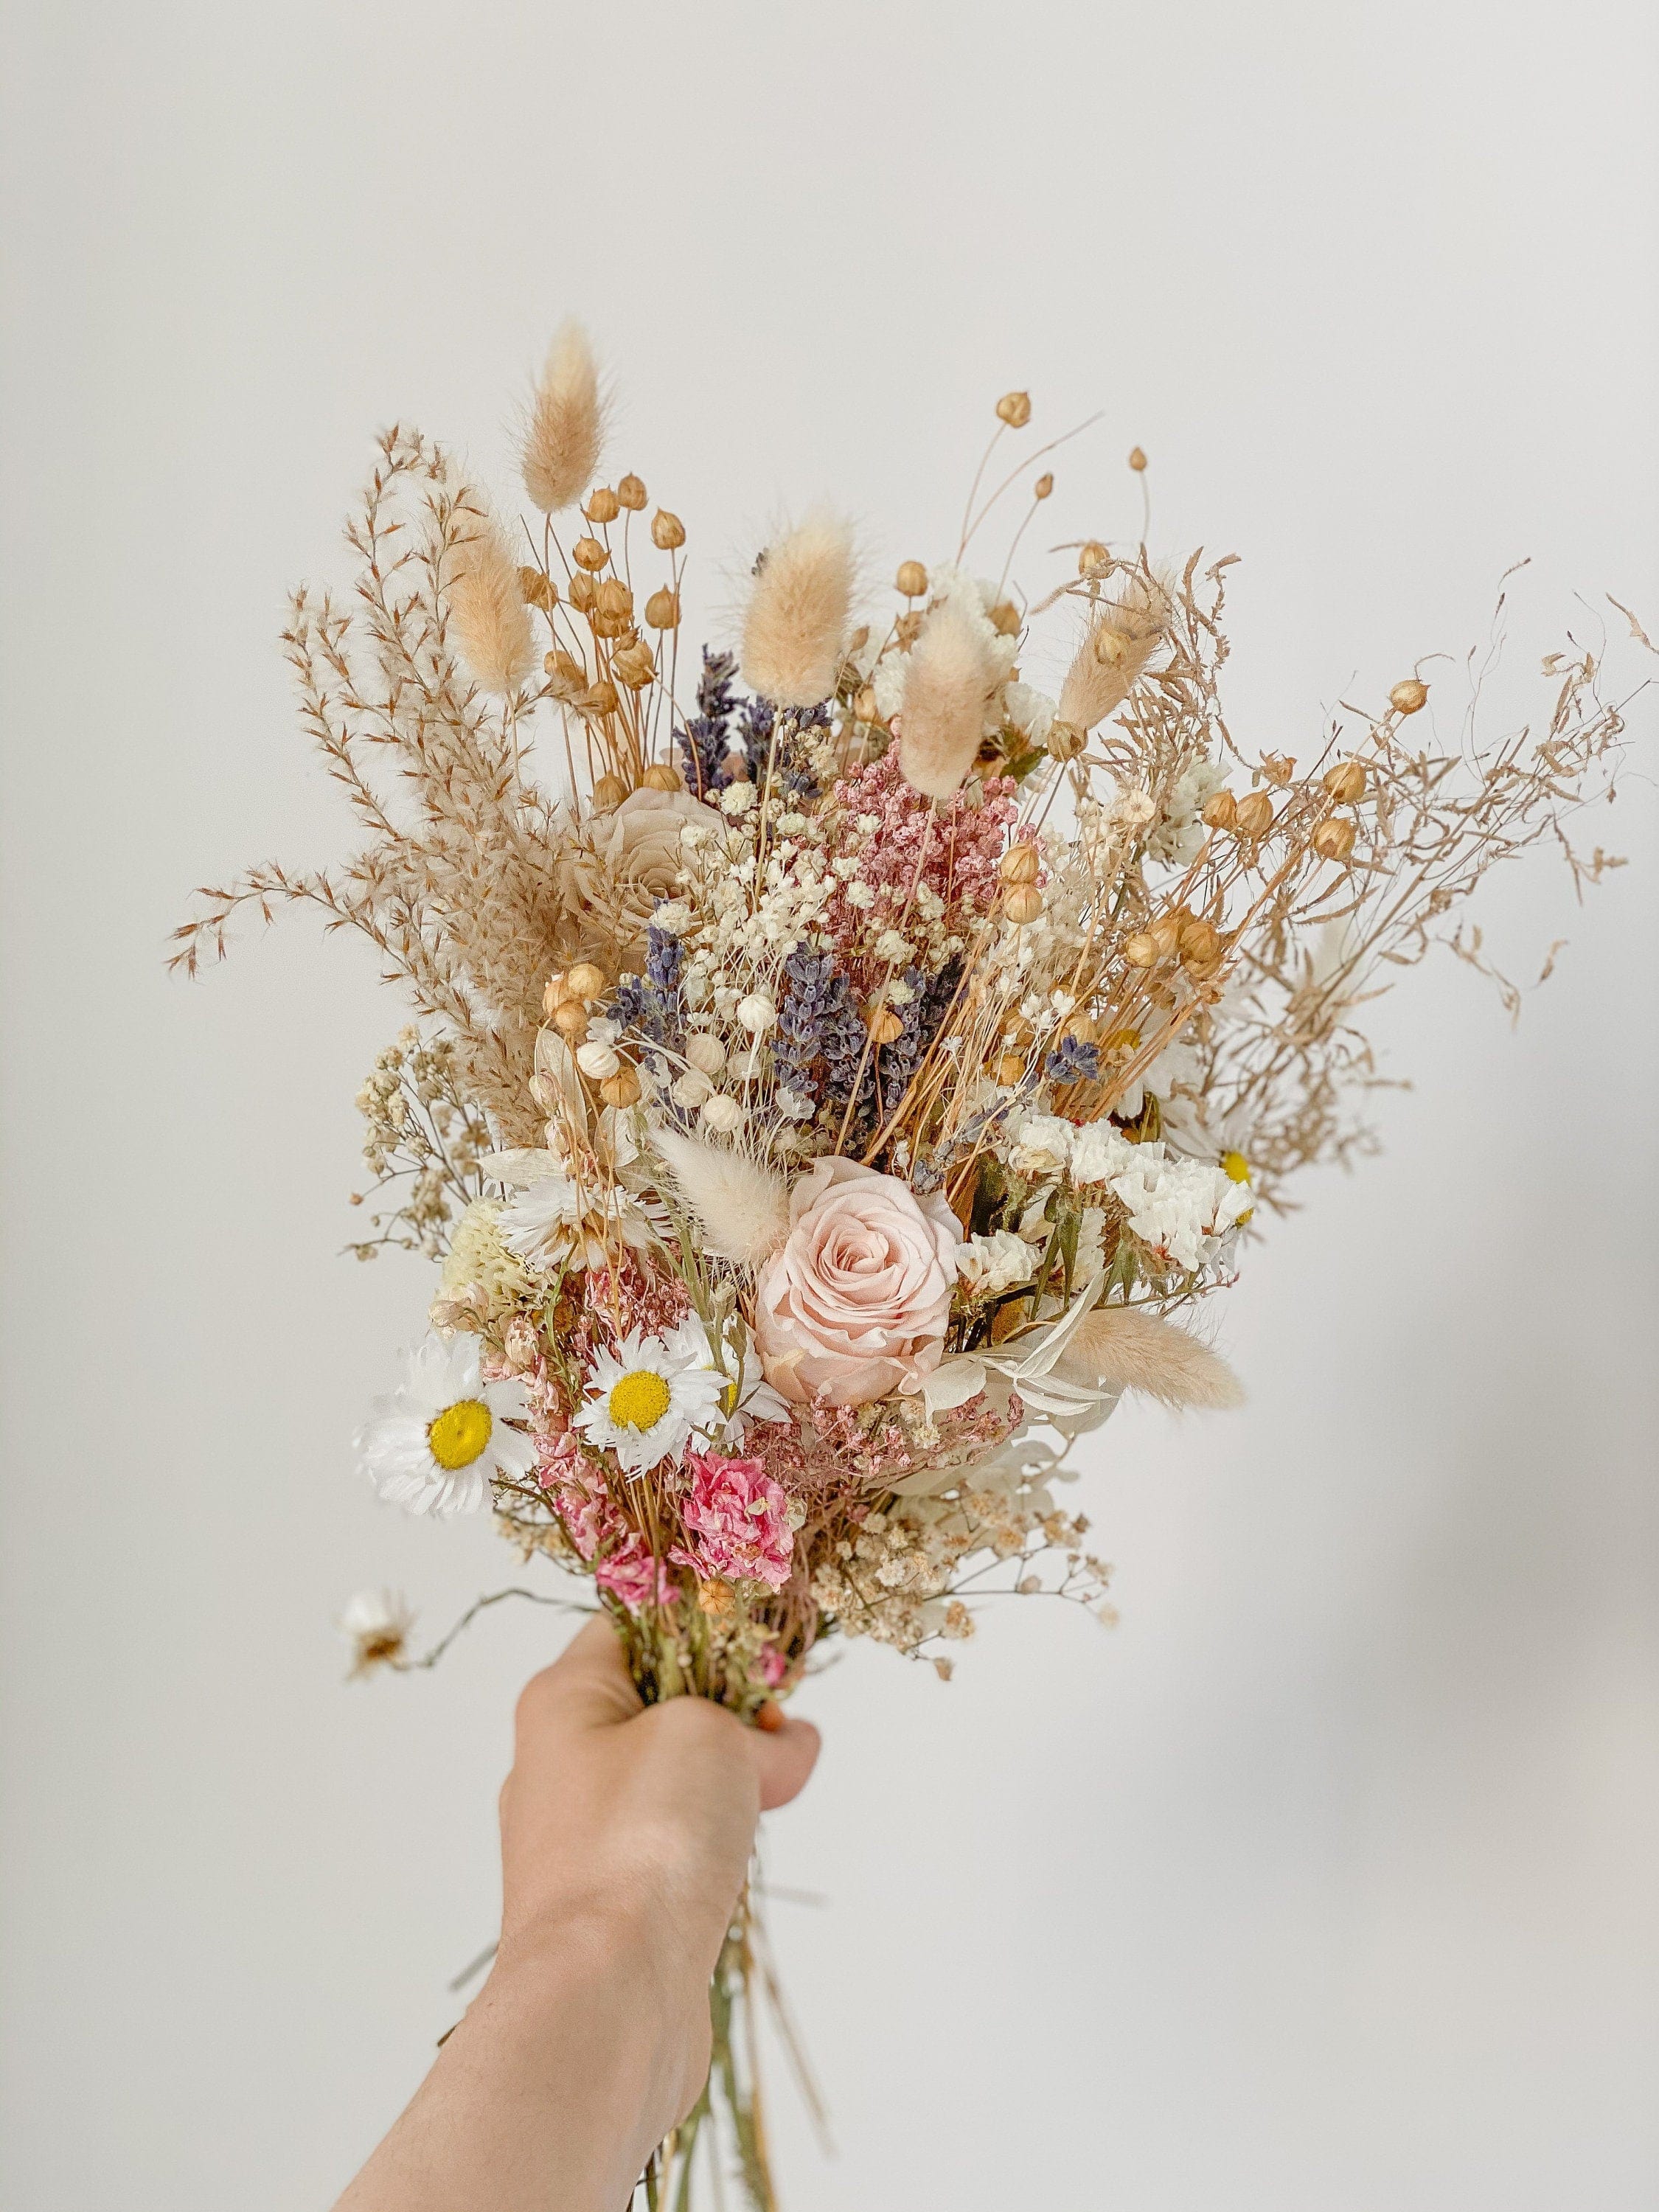 Dried Bouquets Natural Dried Flowers DIY Living Room Decoration Flowers 1  Bunch